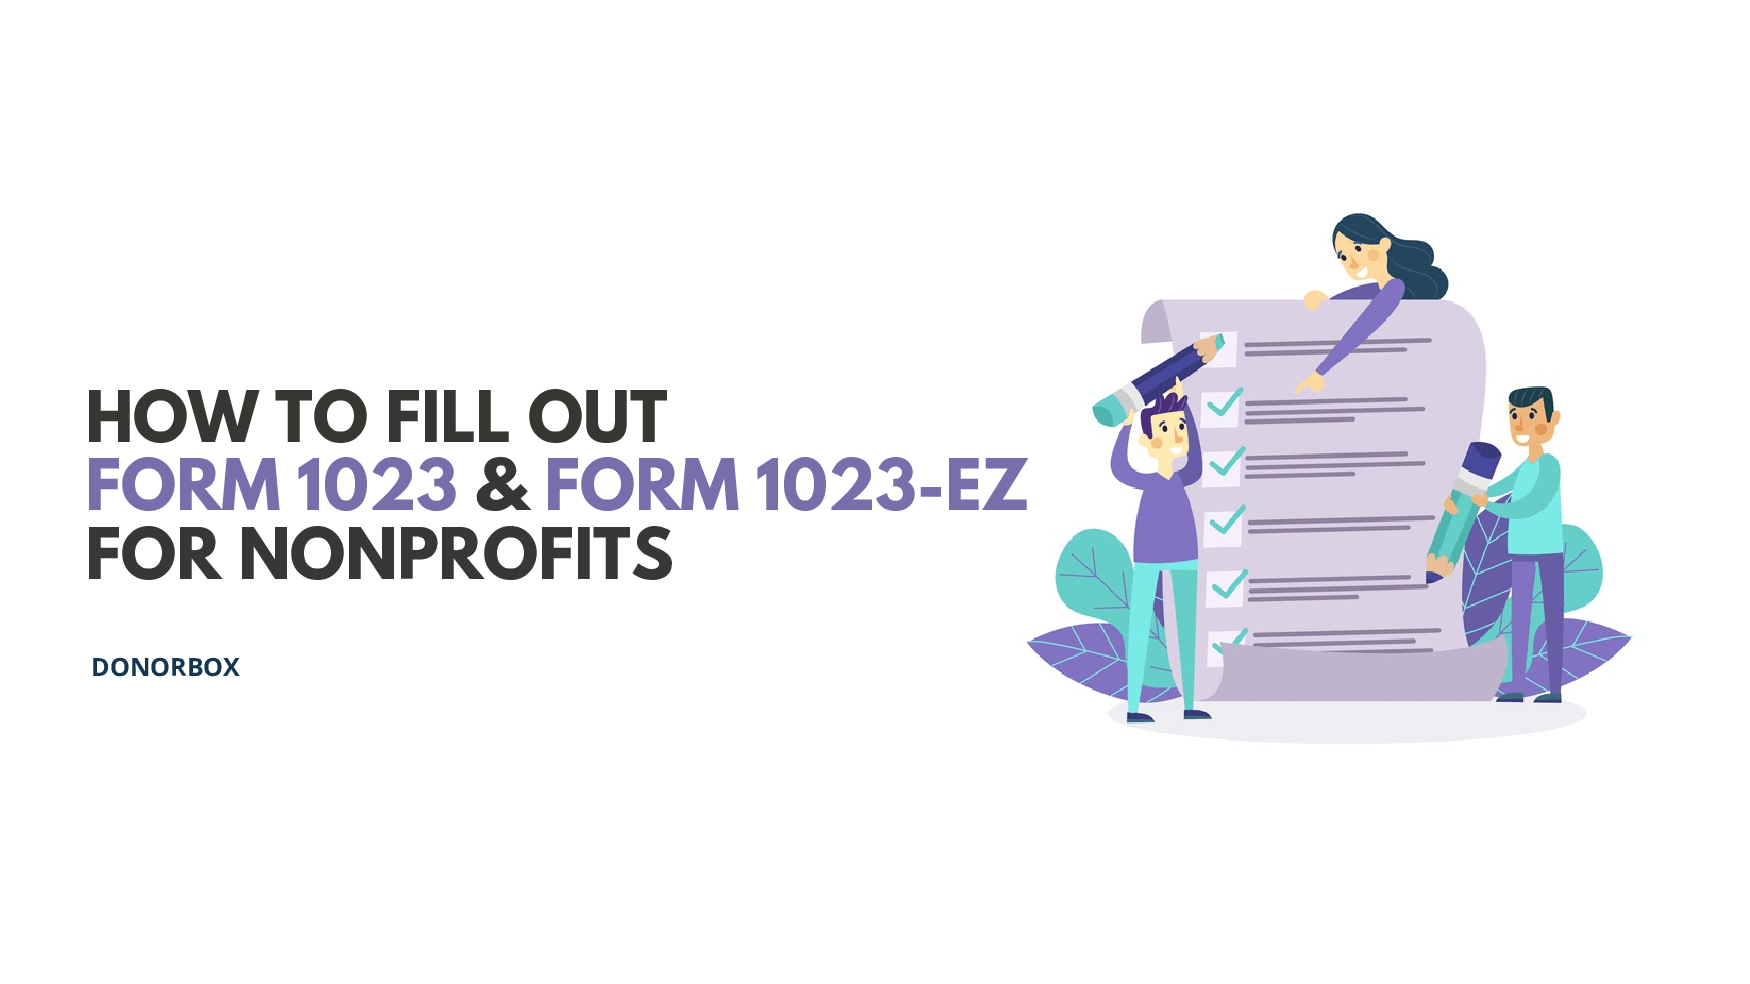 How to Fill Out Form 1023 and Form 1023-EZ for Nonprofits